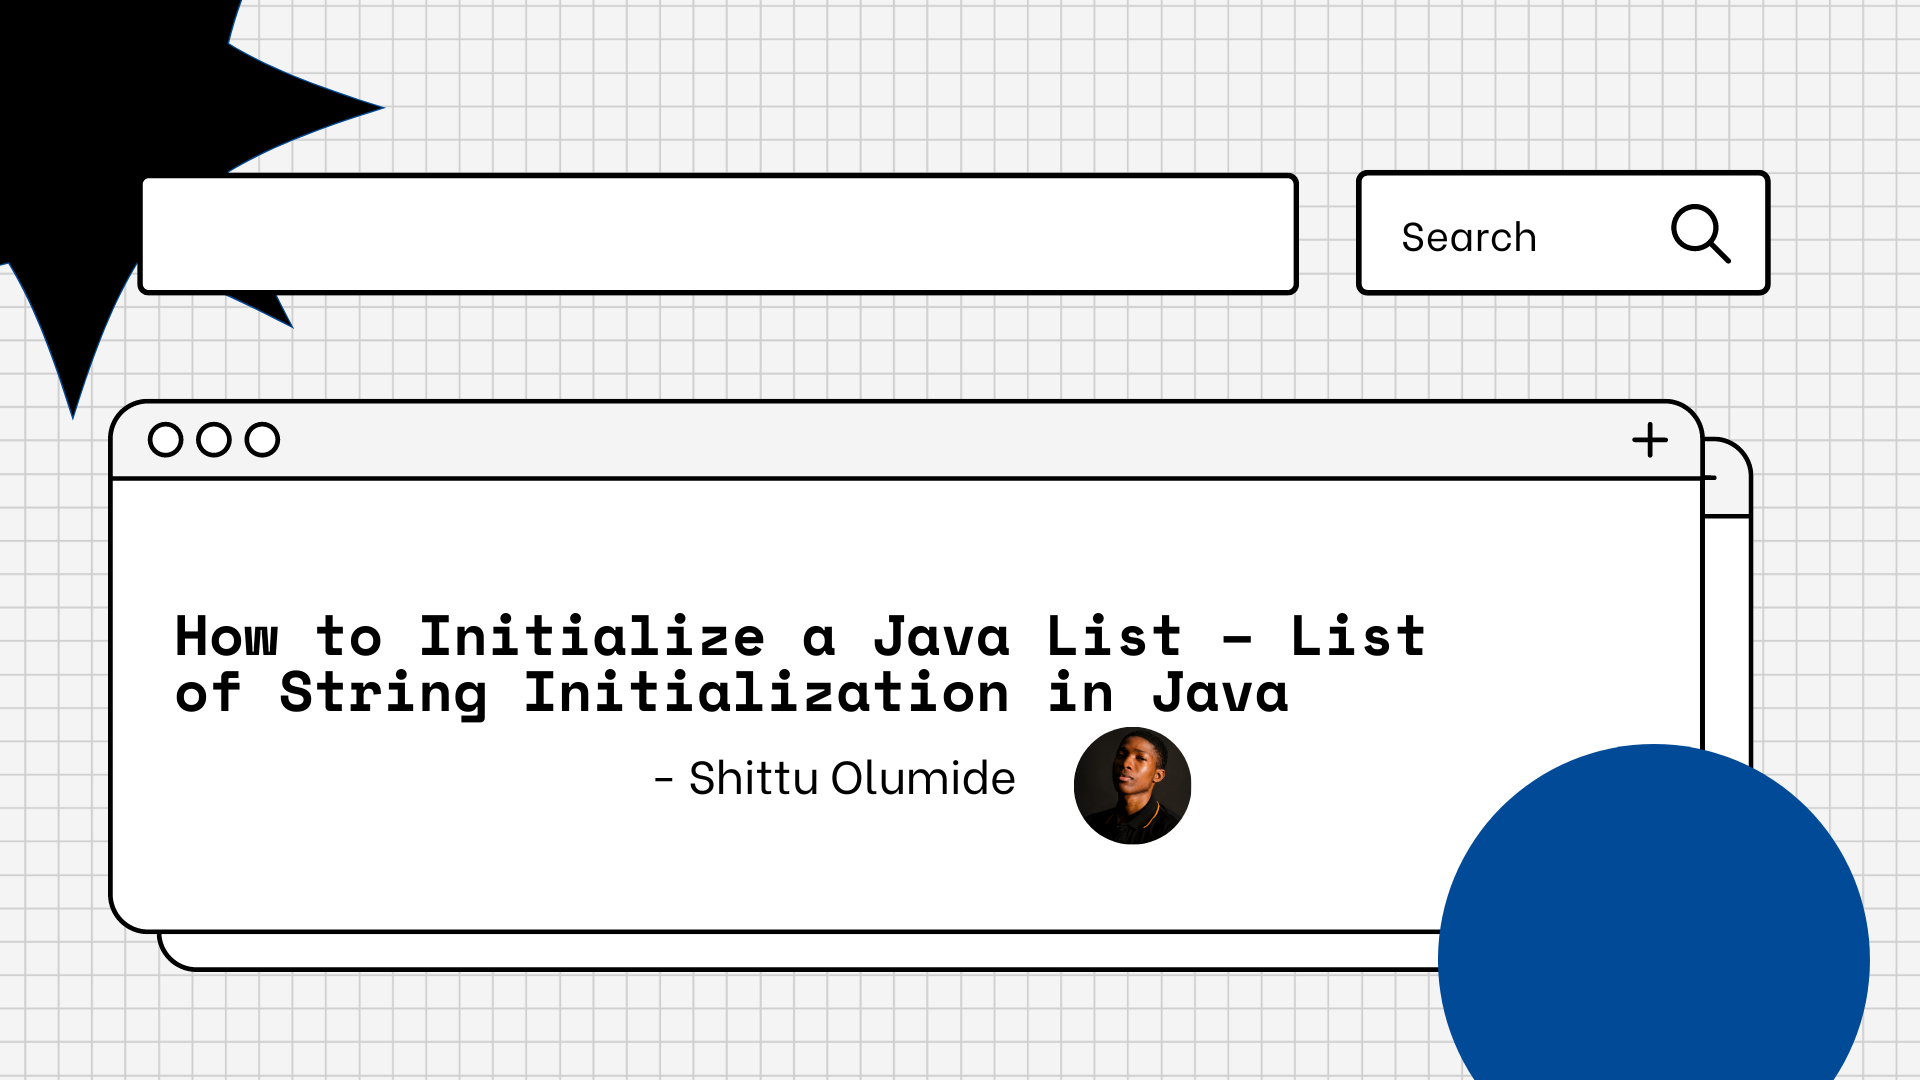 How to Initialize a Java List – List of String Initialization in Java